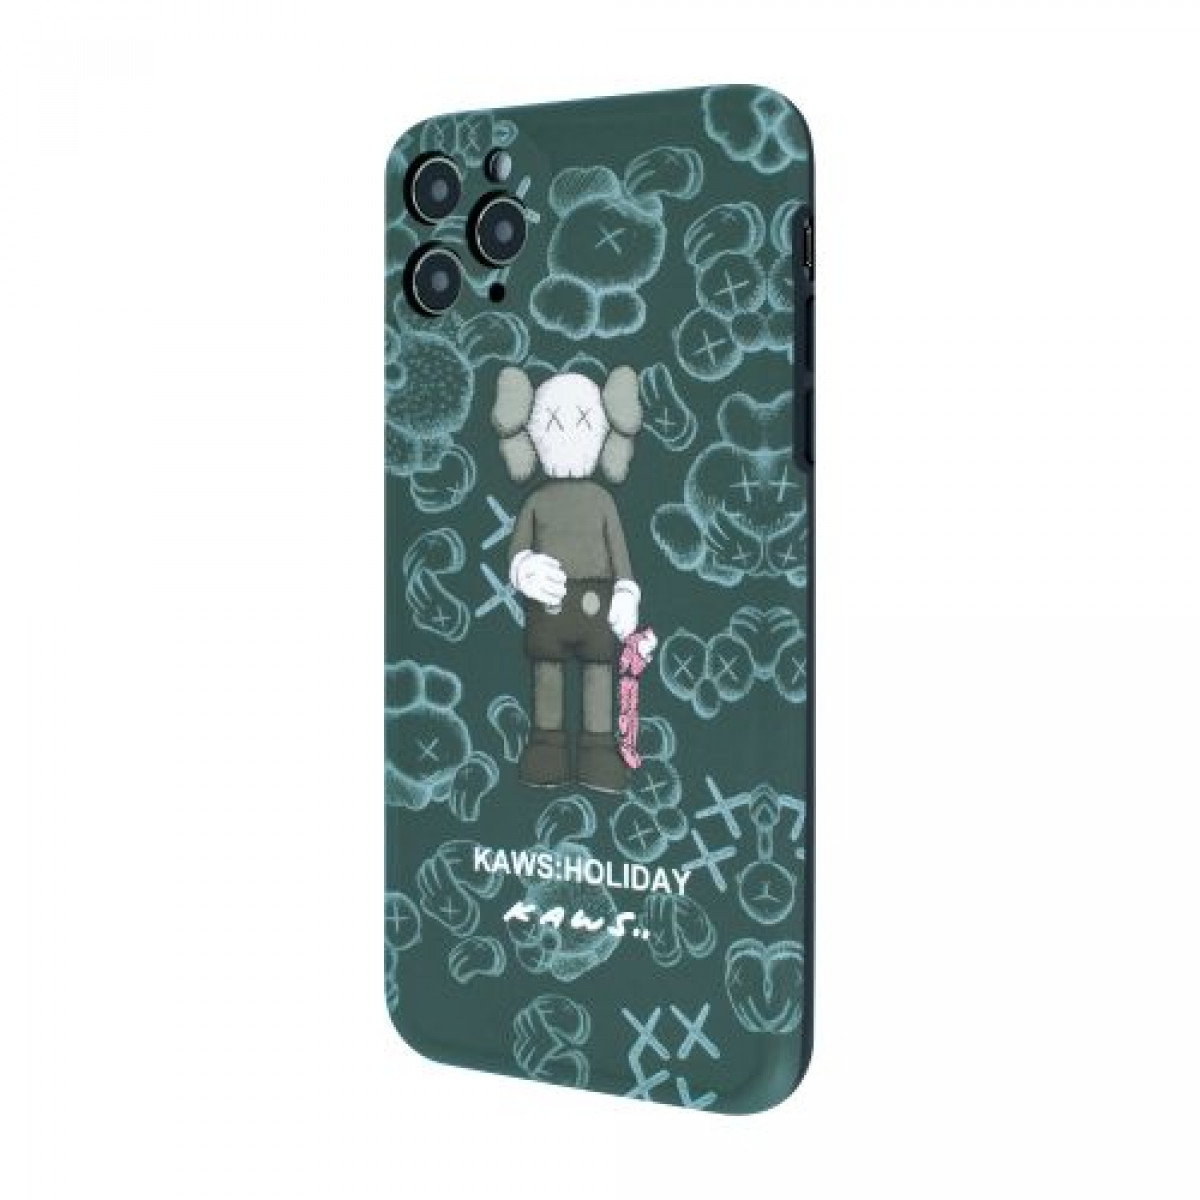 IMD Print Kaws Holiday Case for iPhone 11 Pro